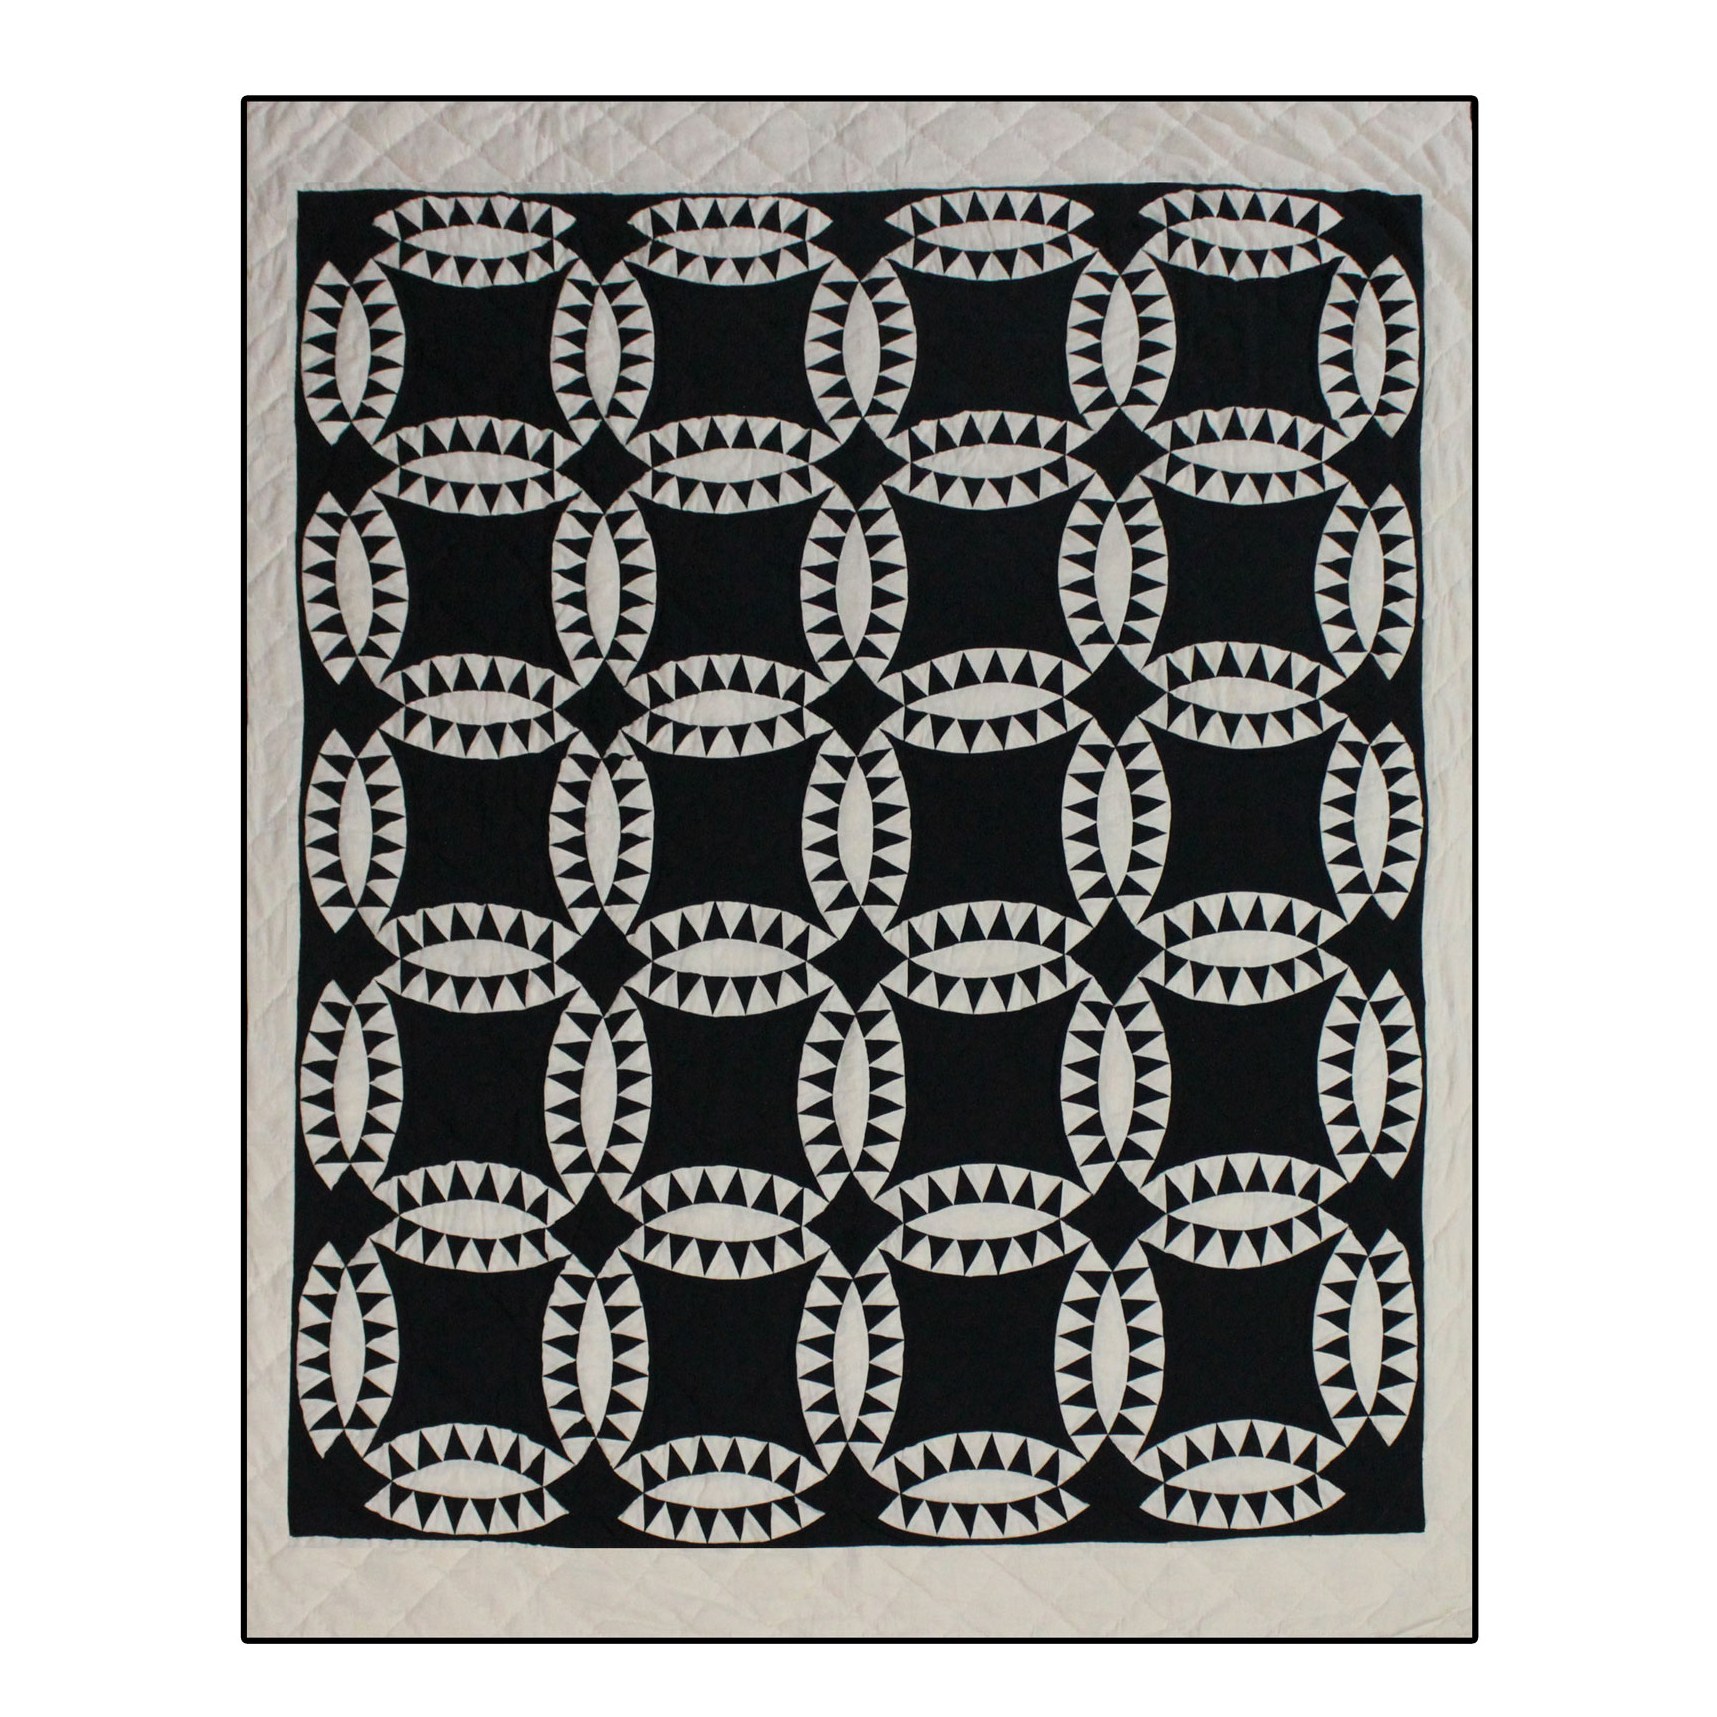 Black and White Wedding Ring Queen Quilt 85"W x 95"L